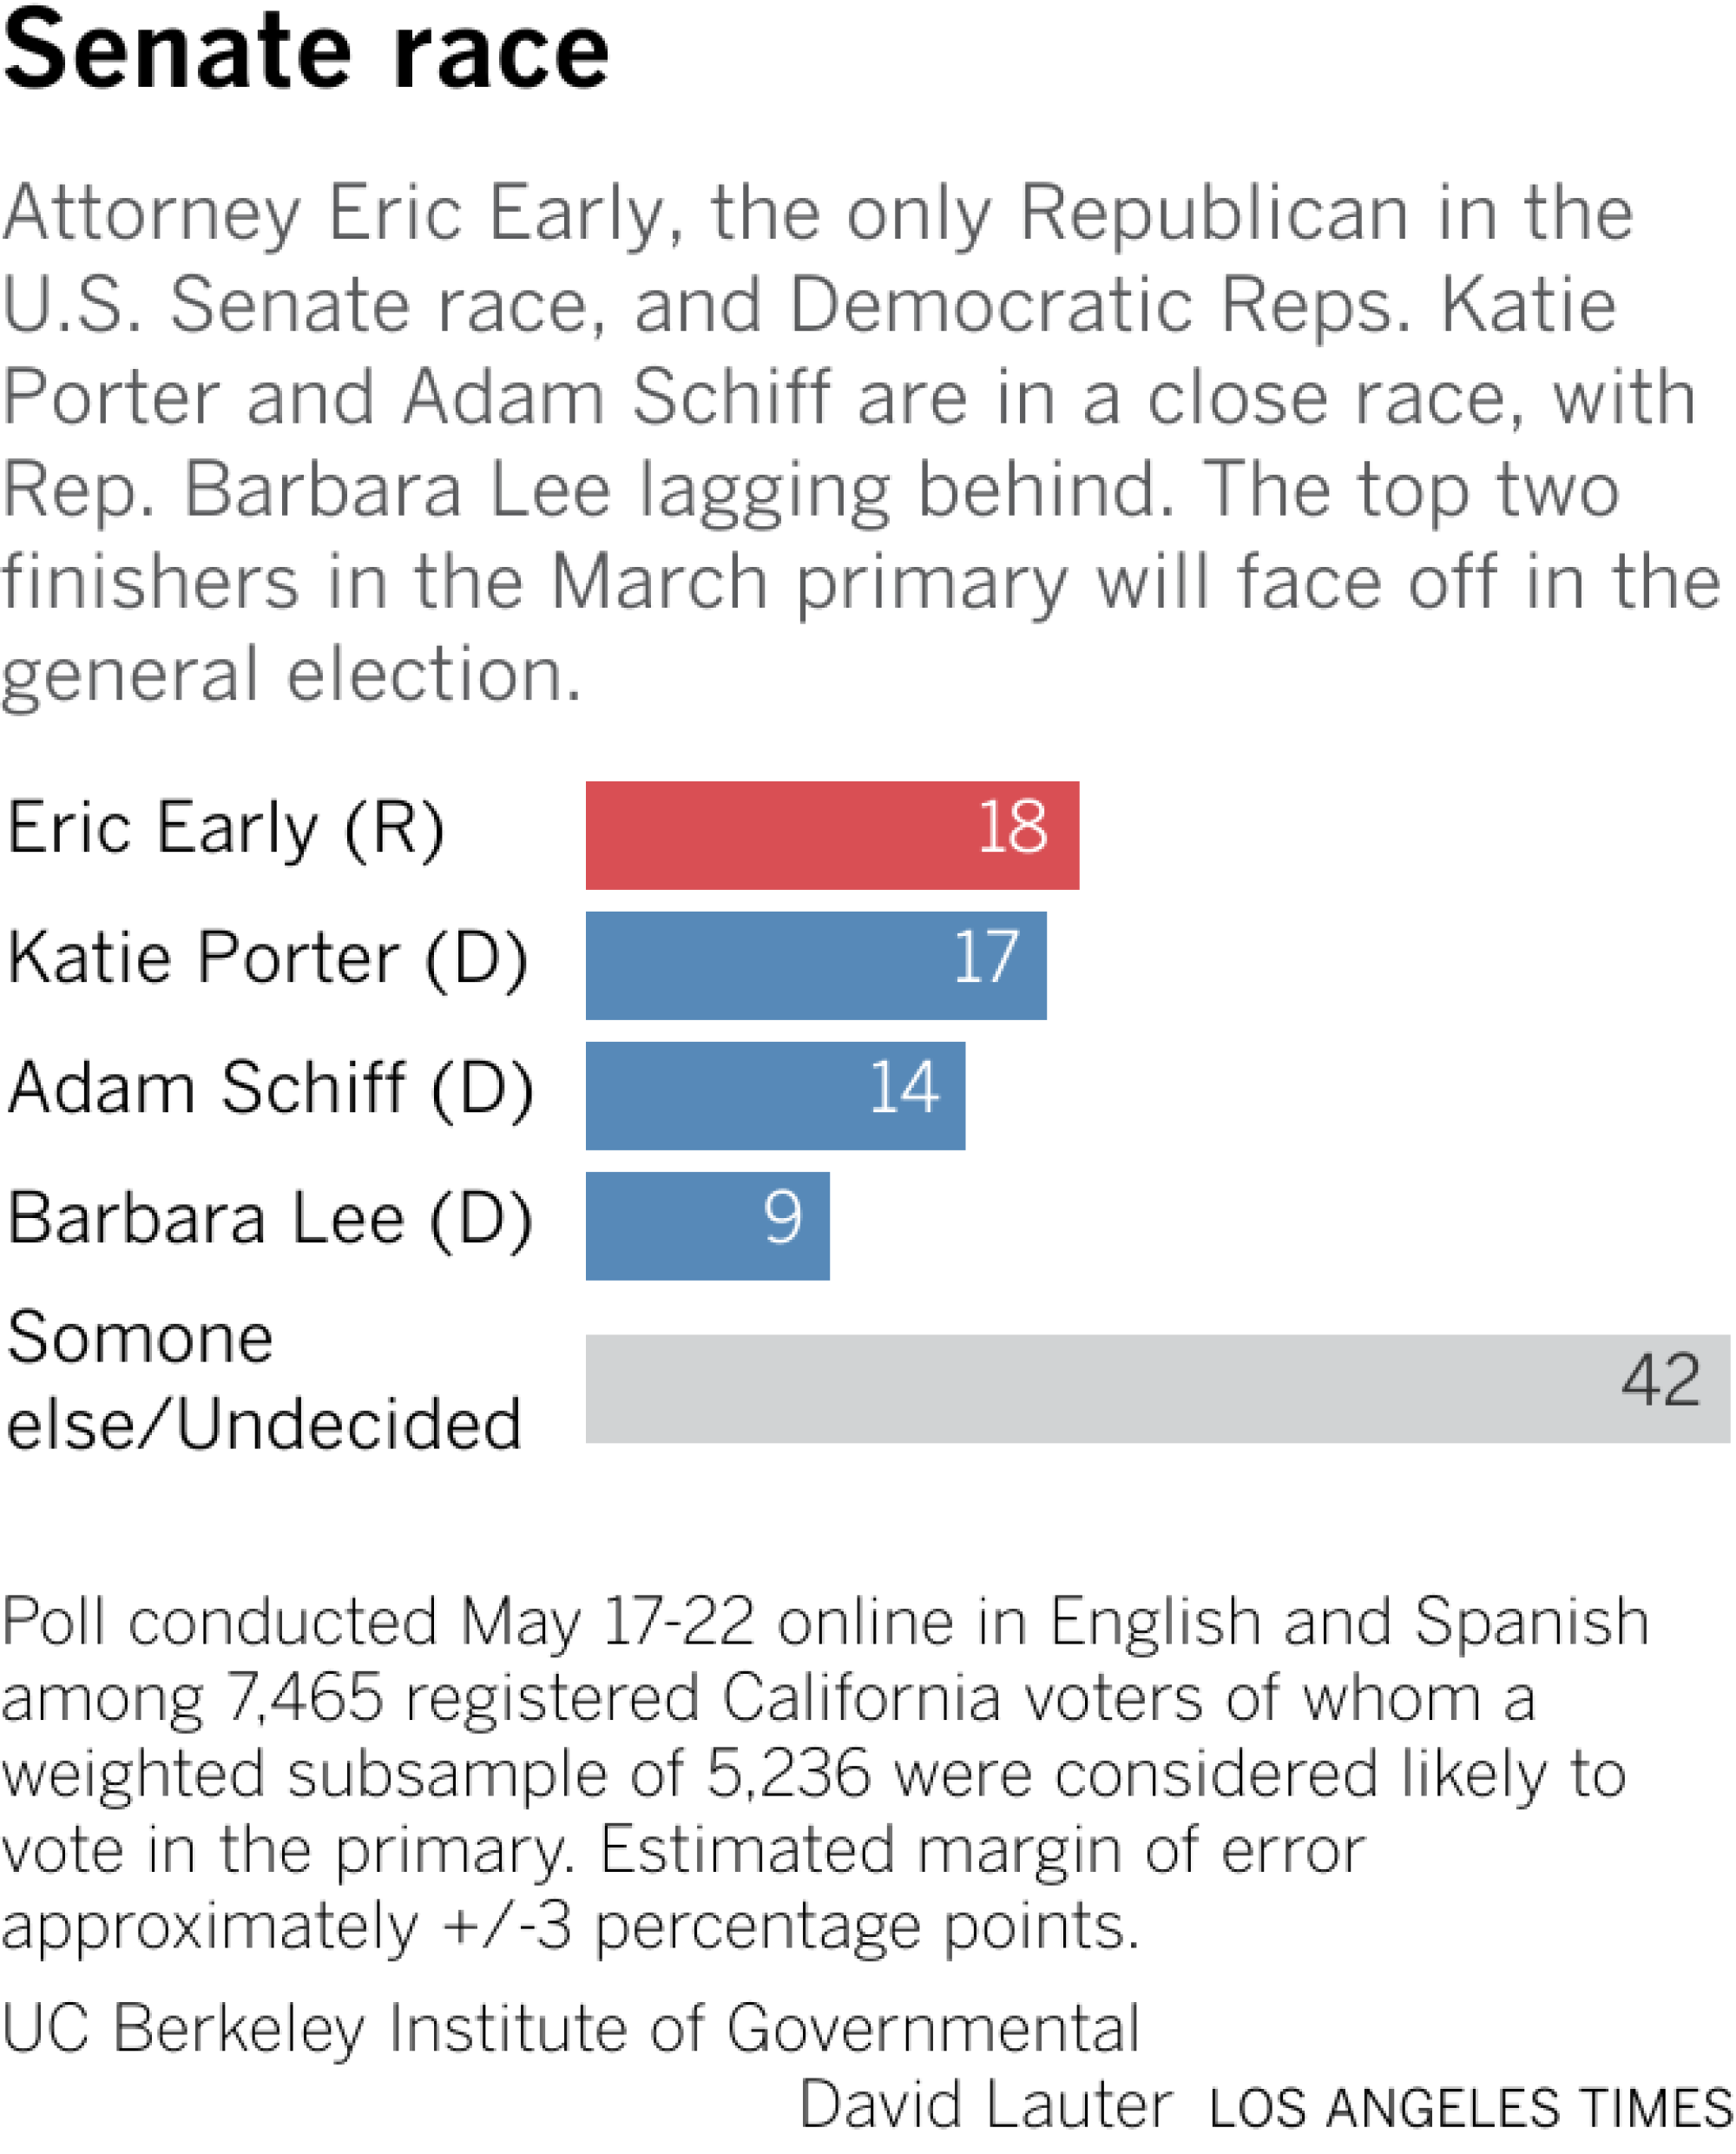 Bar chart shows the share of voters who plan to vote for each of the candidates in the Senate race.